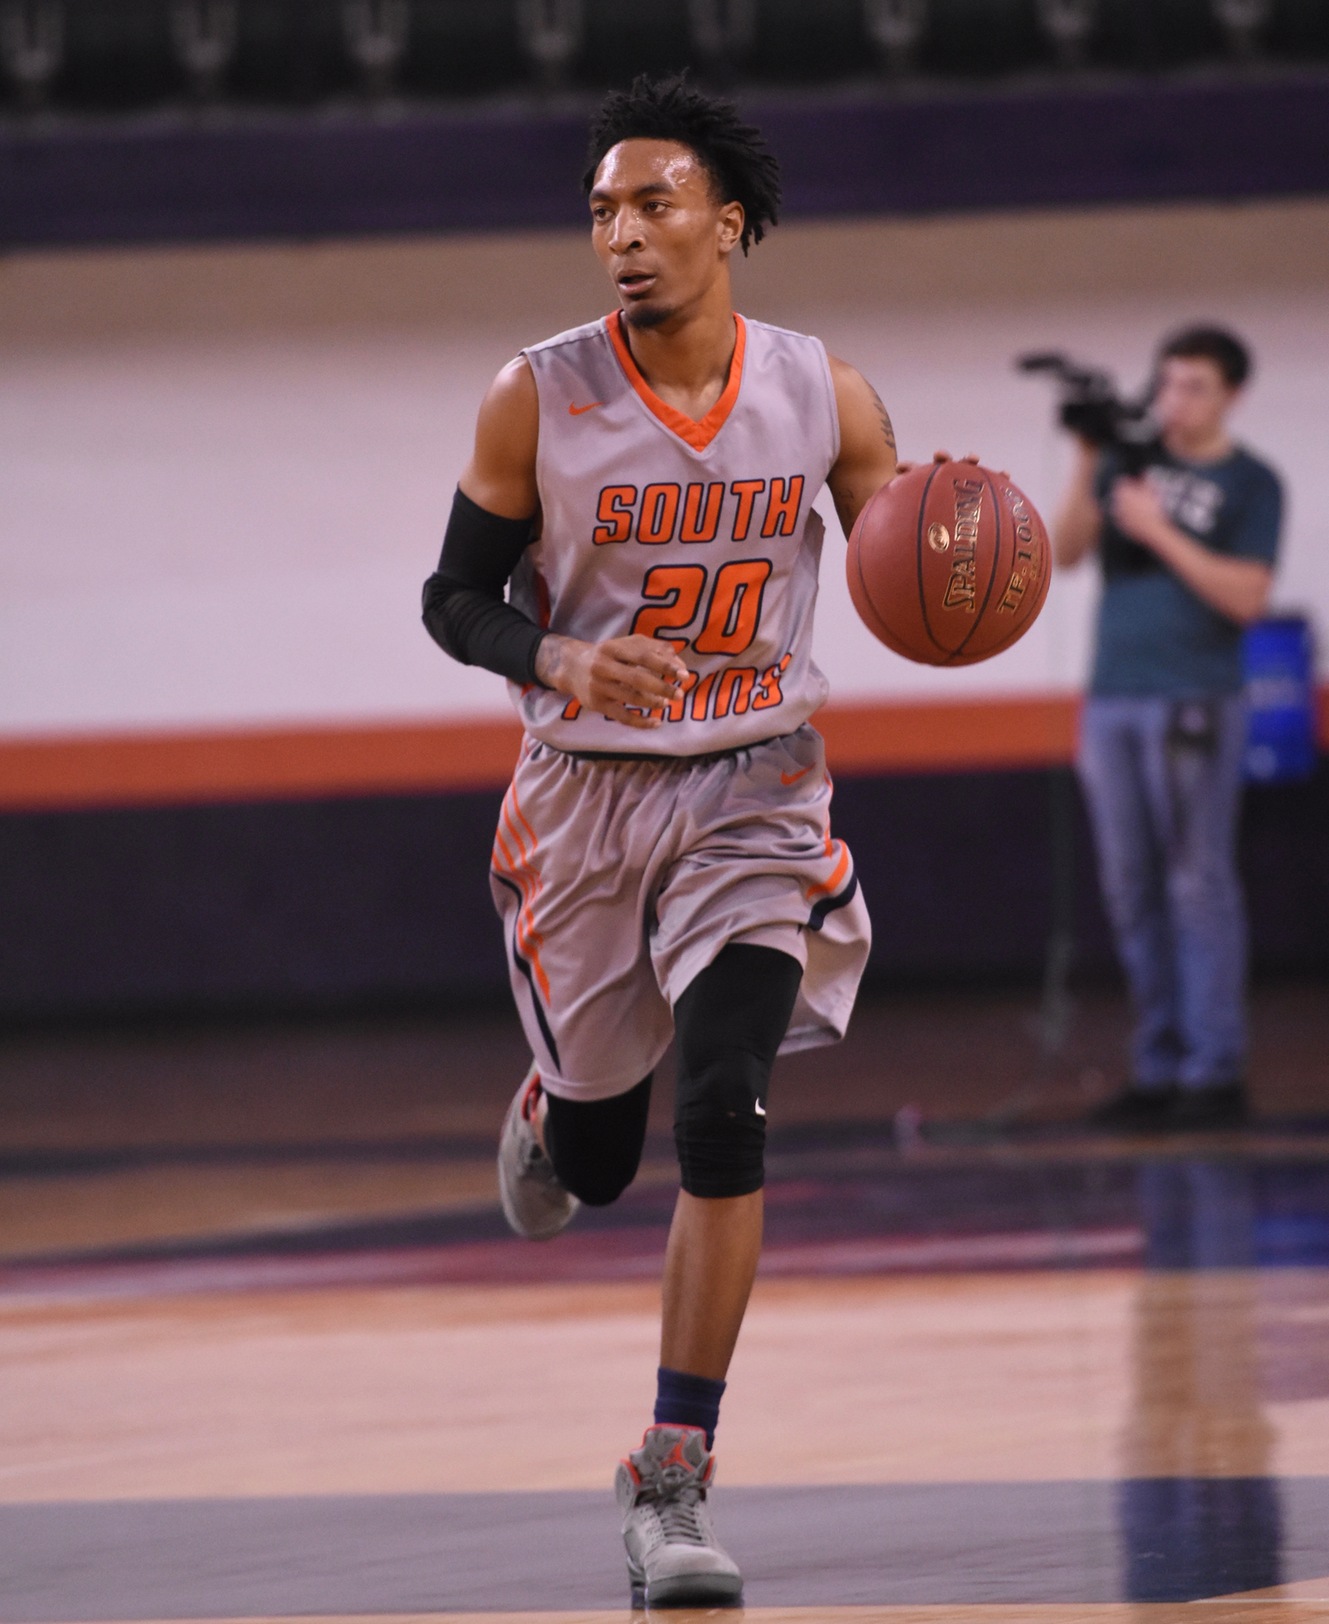 Texans fall to No. 8 Odessa 95-80 Monday night in Odessa